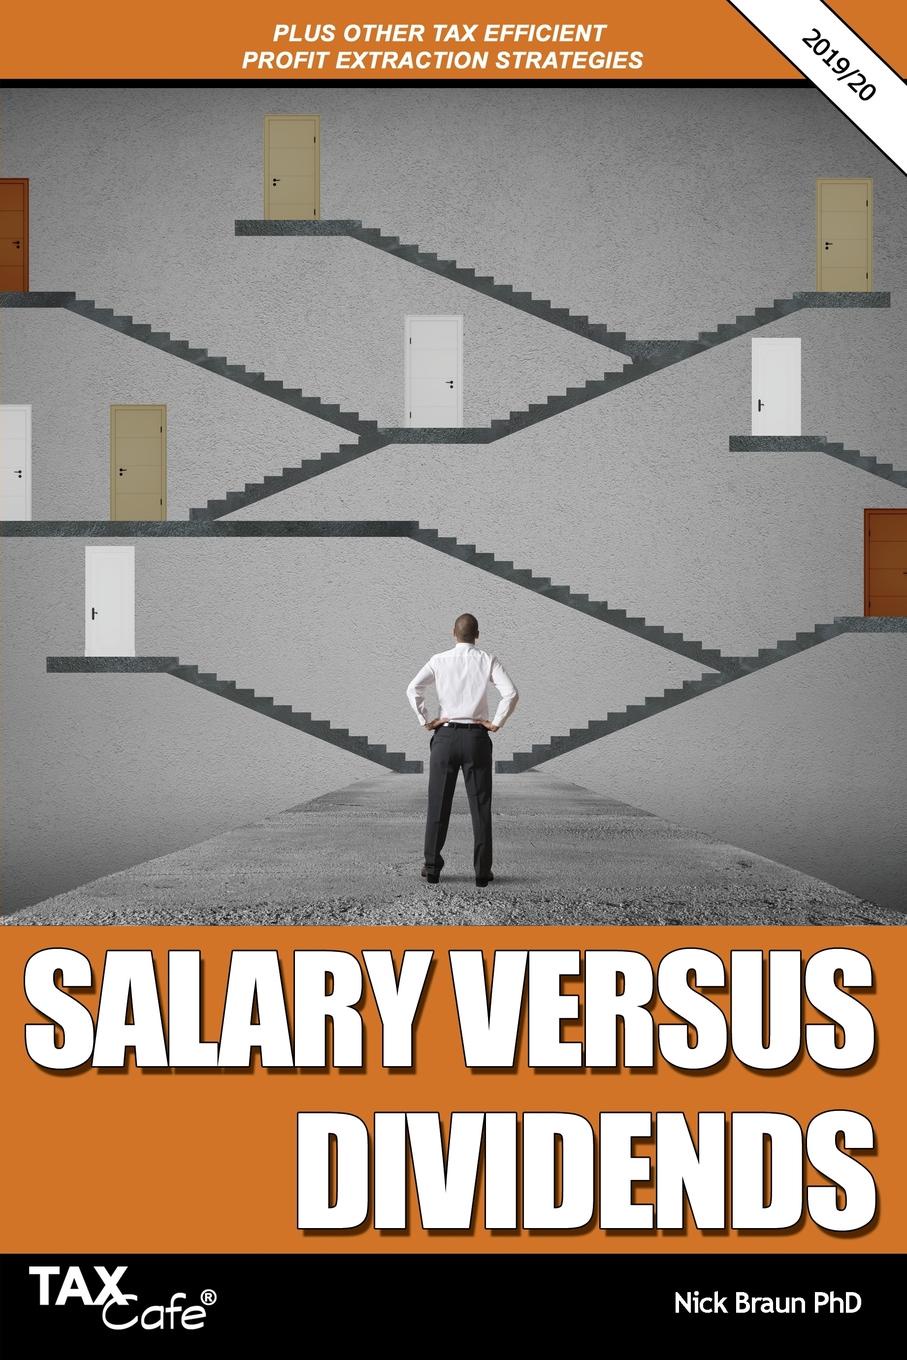 Salary versus Dividends & Other Tax Efficient Profit Extraction Strategies 2019/20